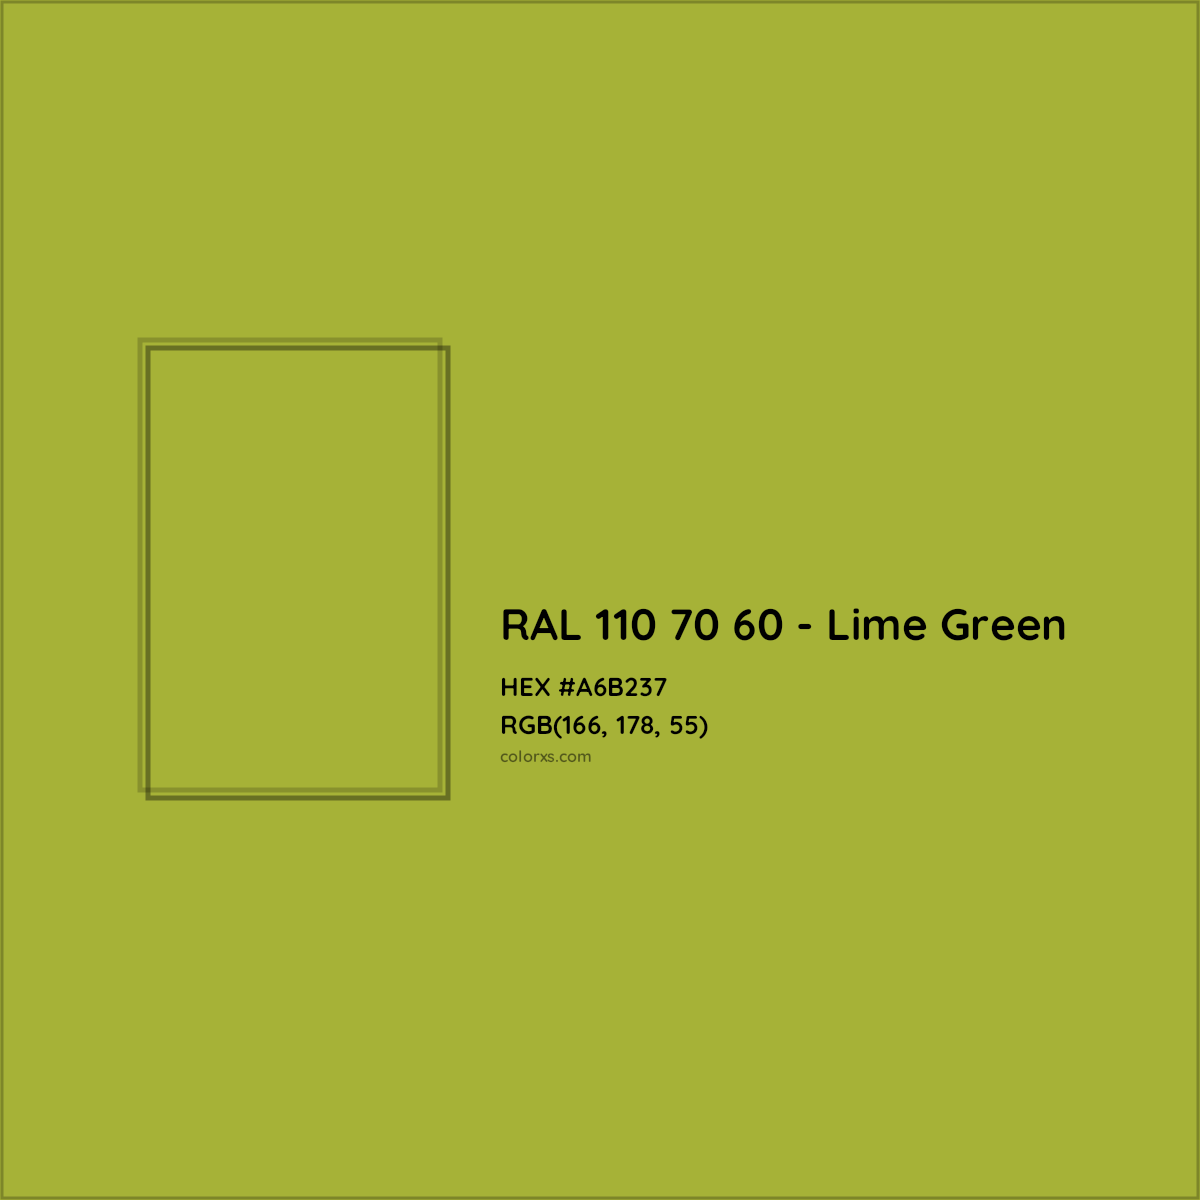 HEX #A6B237 RAL 110 70 60 - Lime Green CMS RAL Design - Color Code